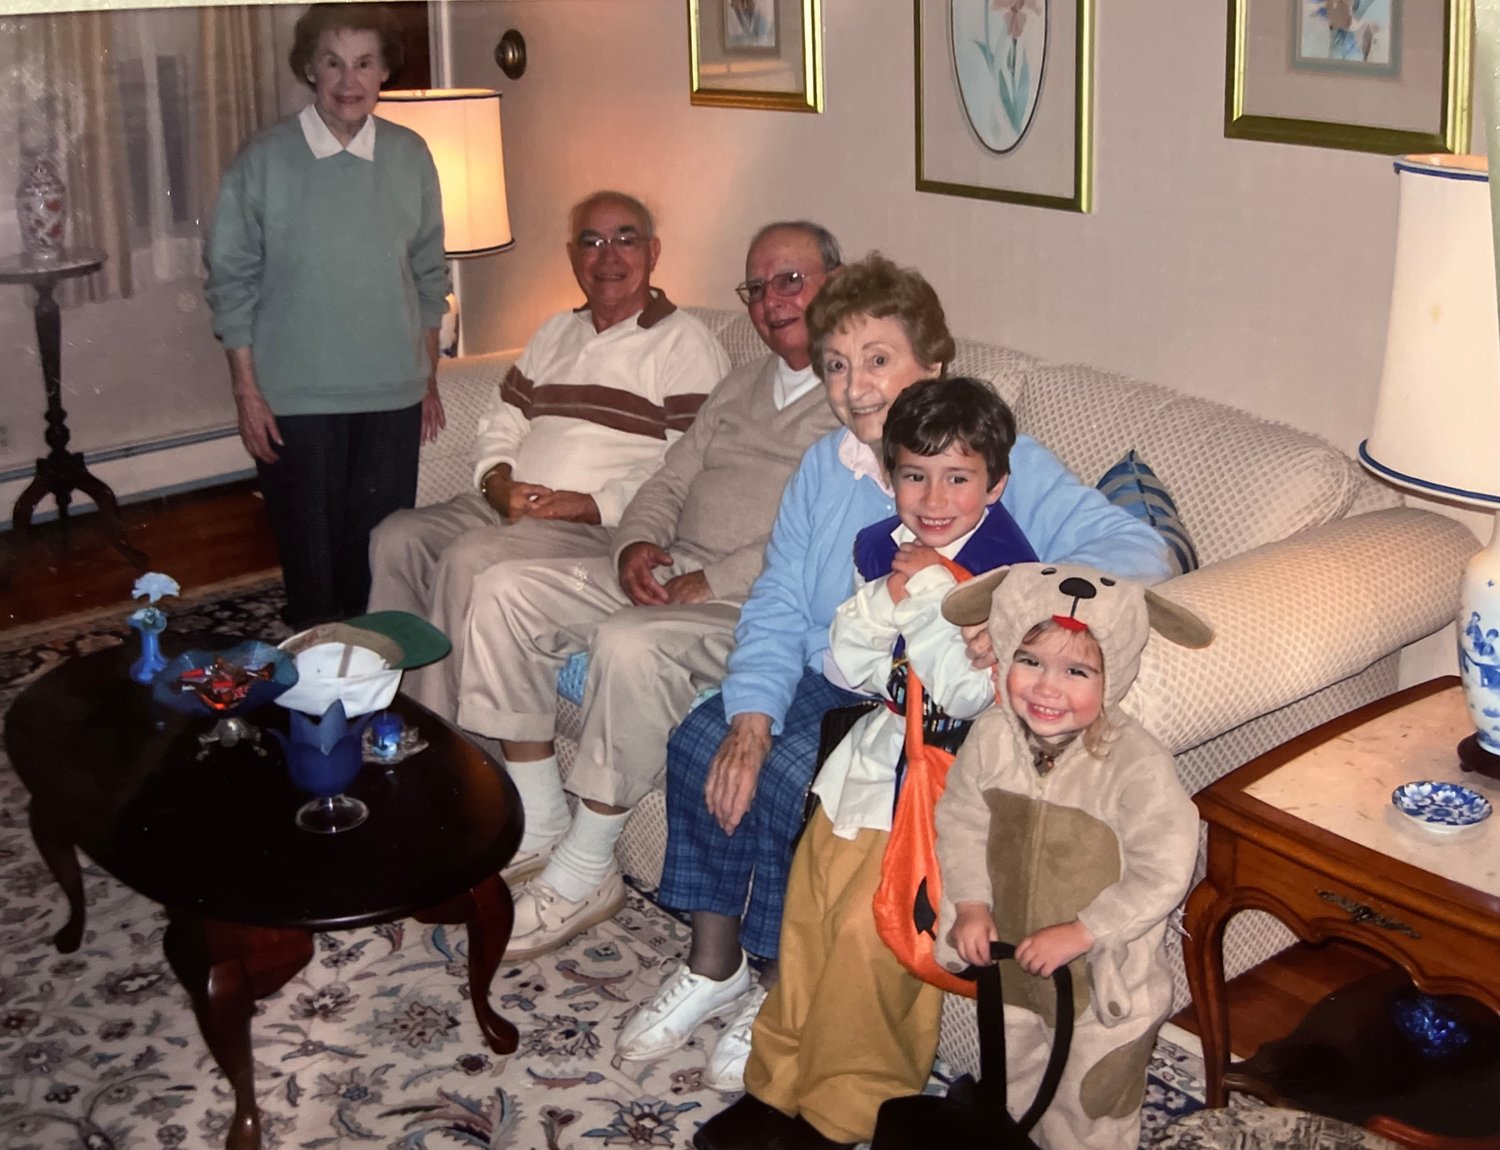 Pictured are (from left to right) Connie Masiello, Tony, Chet and his wife Rose Masiello, and Eli and Anja Kelley.